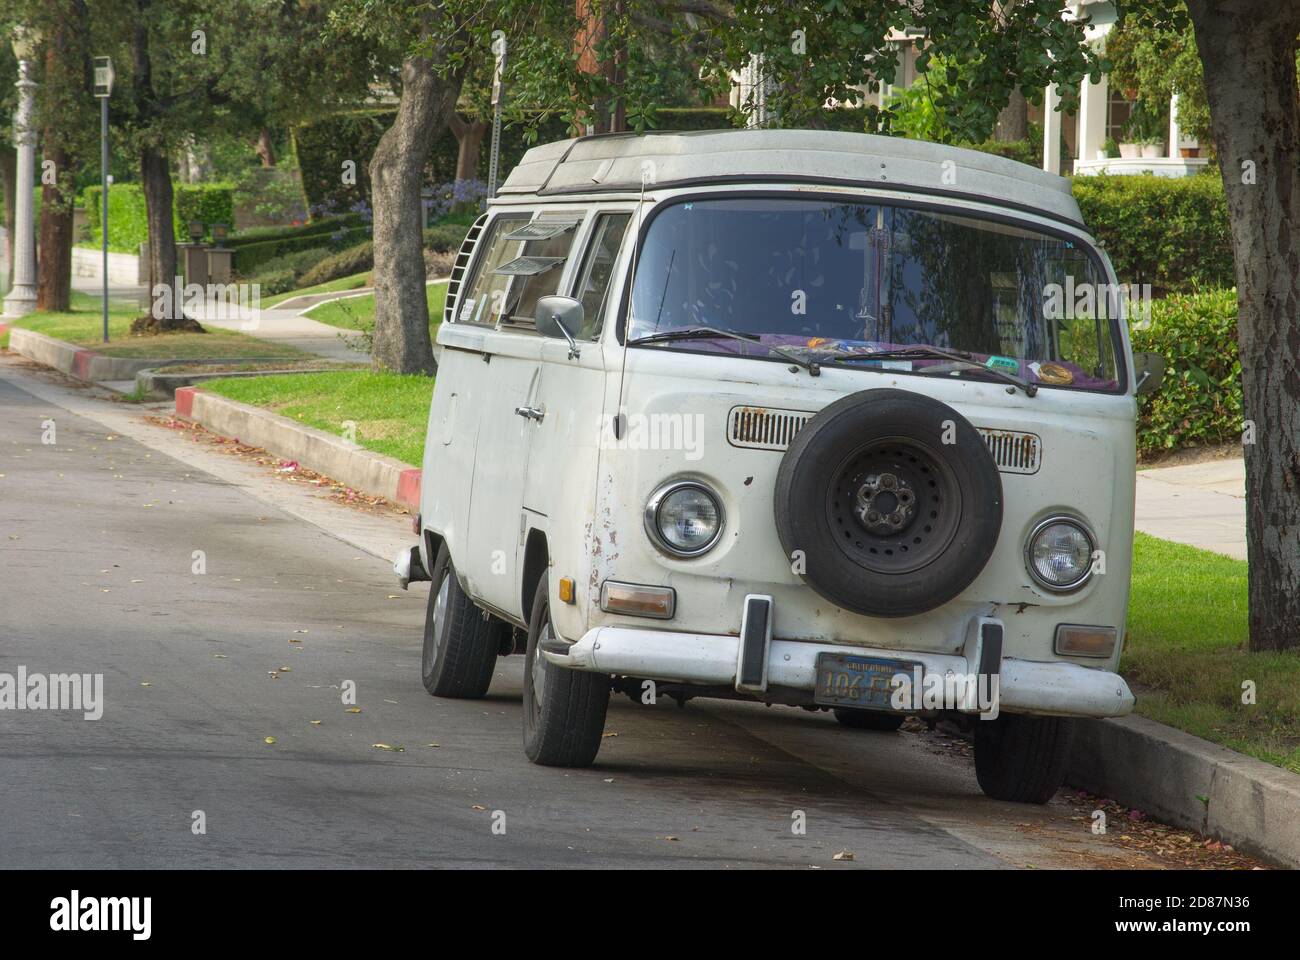 This image shows an old Volkswagen bus parked on a street. Stock Photo